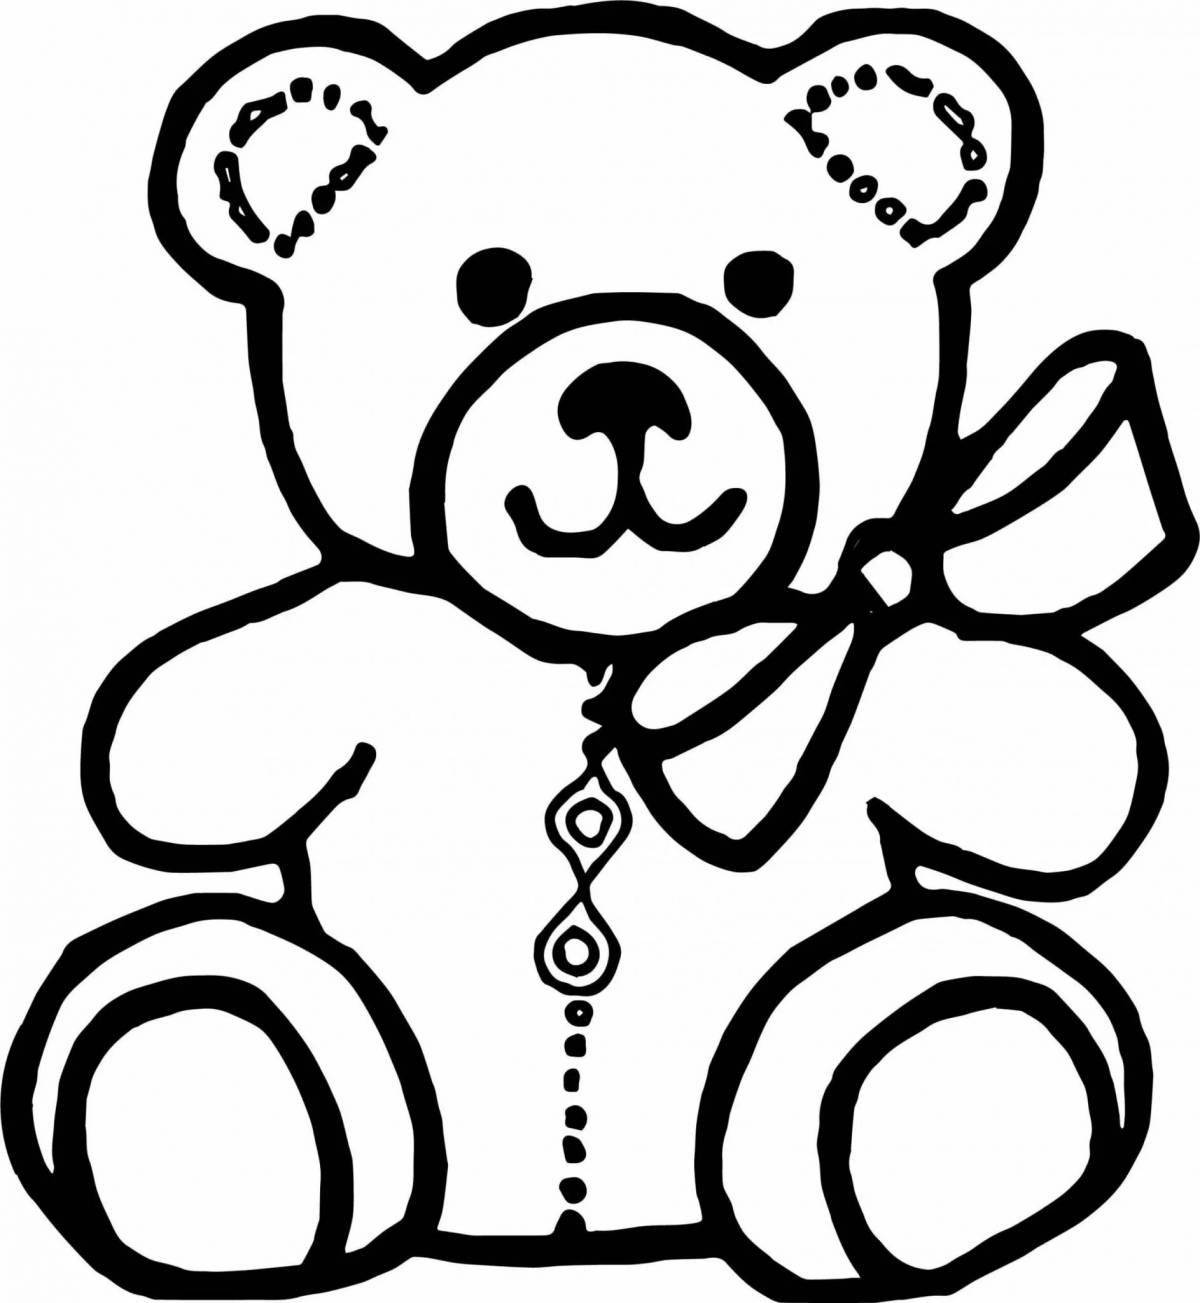 Coloring page bizarre bear with a bow